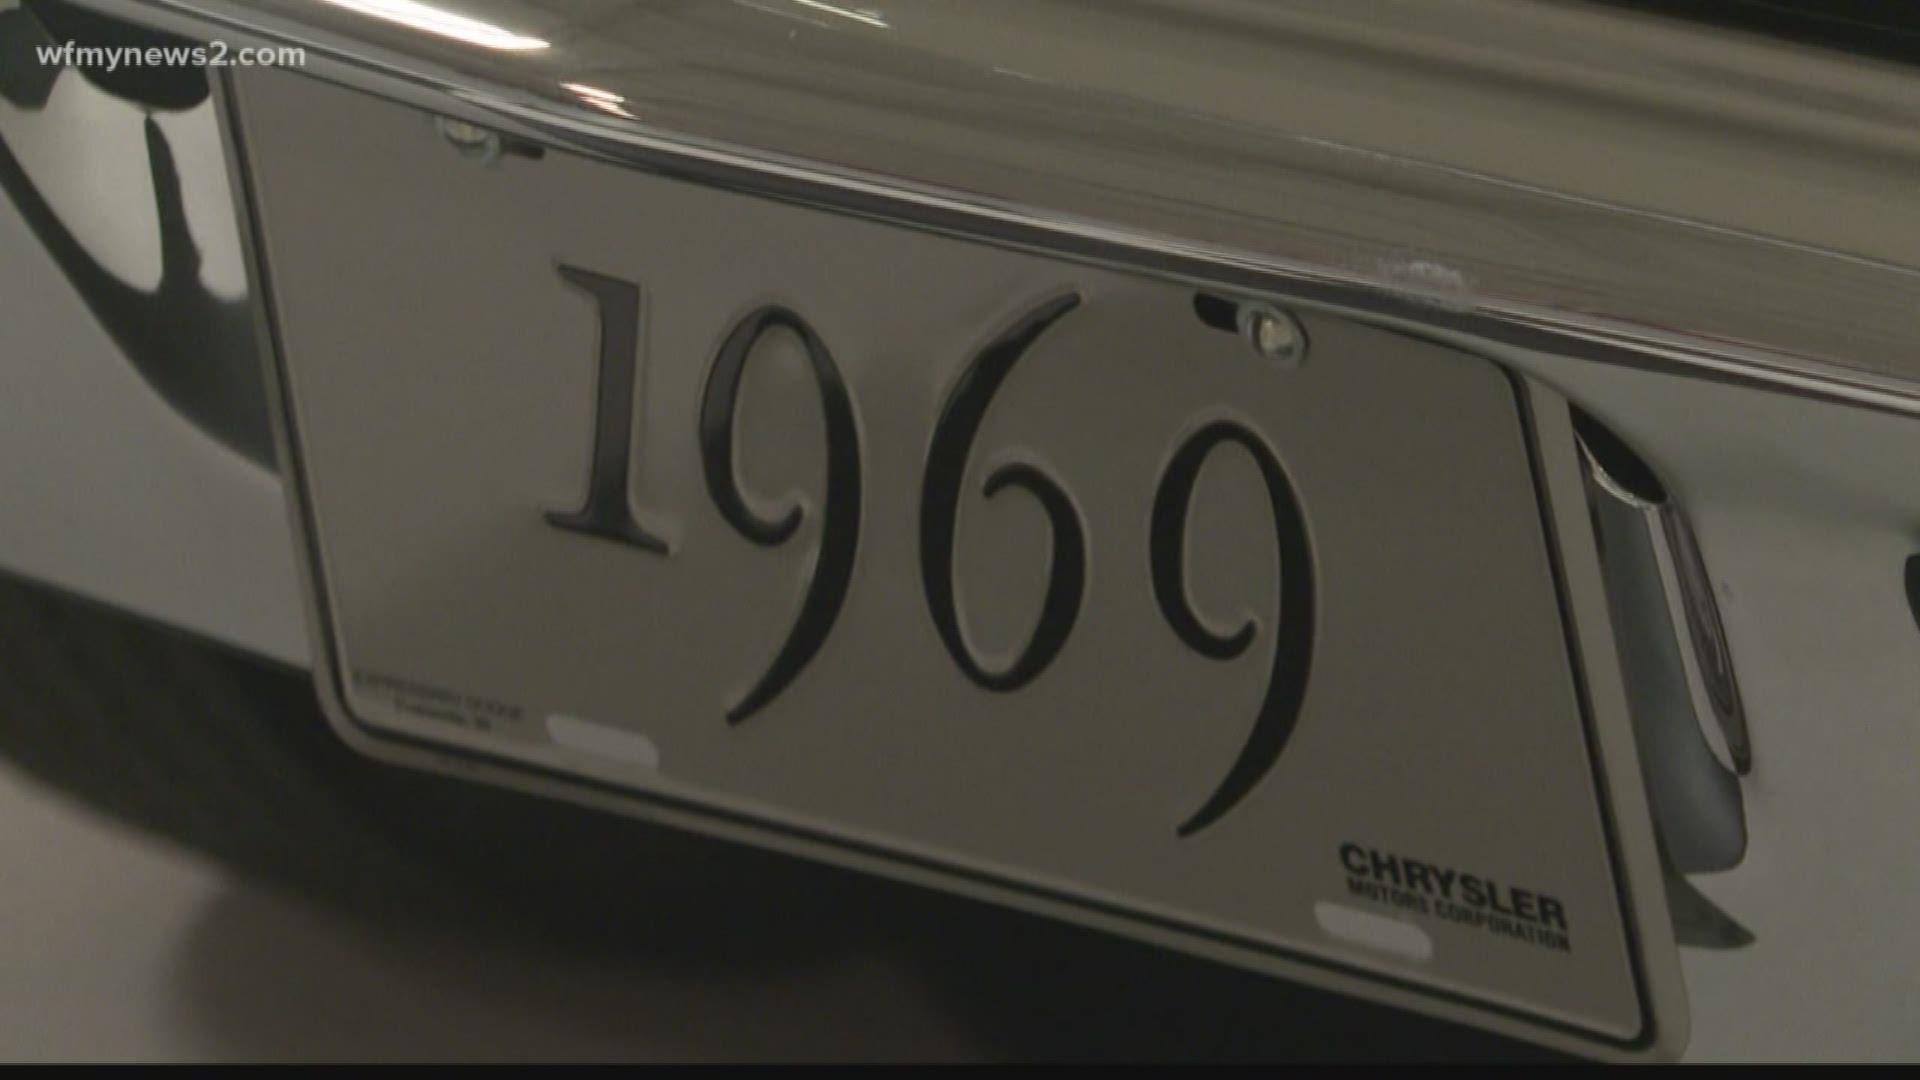 A car collector auctions off his prized collectible car in the Triad.